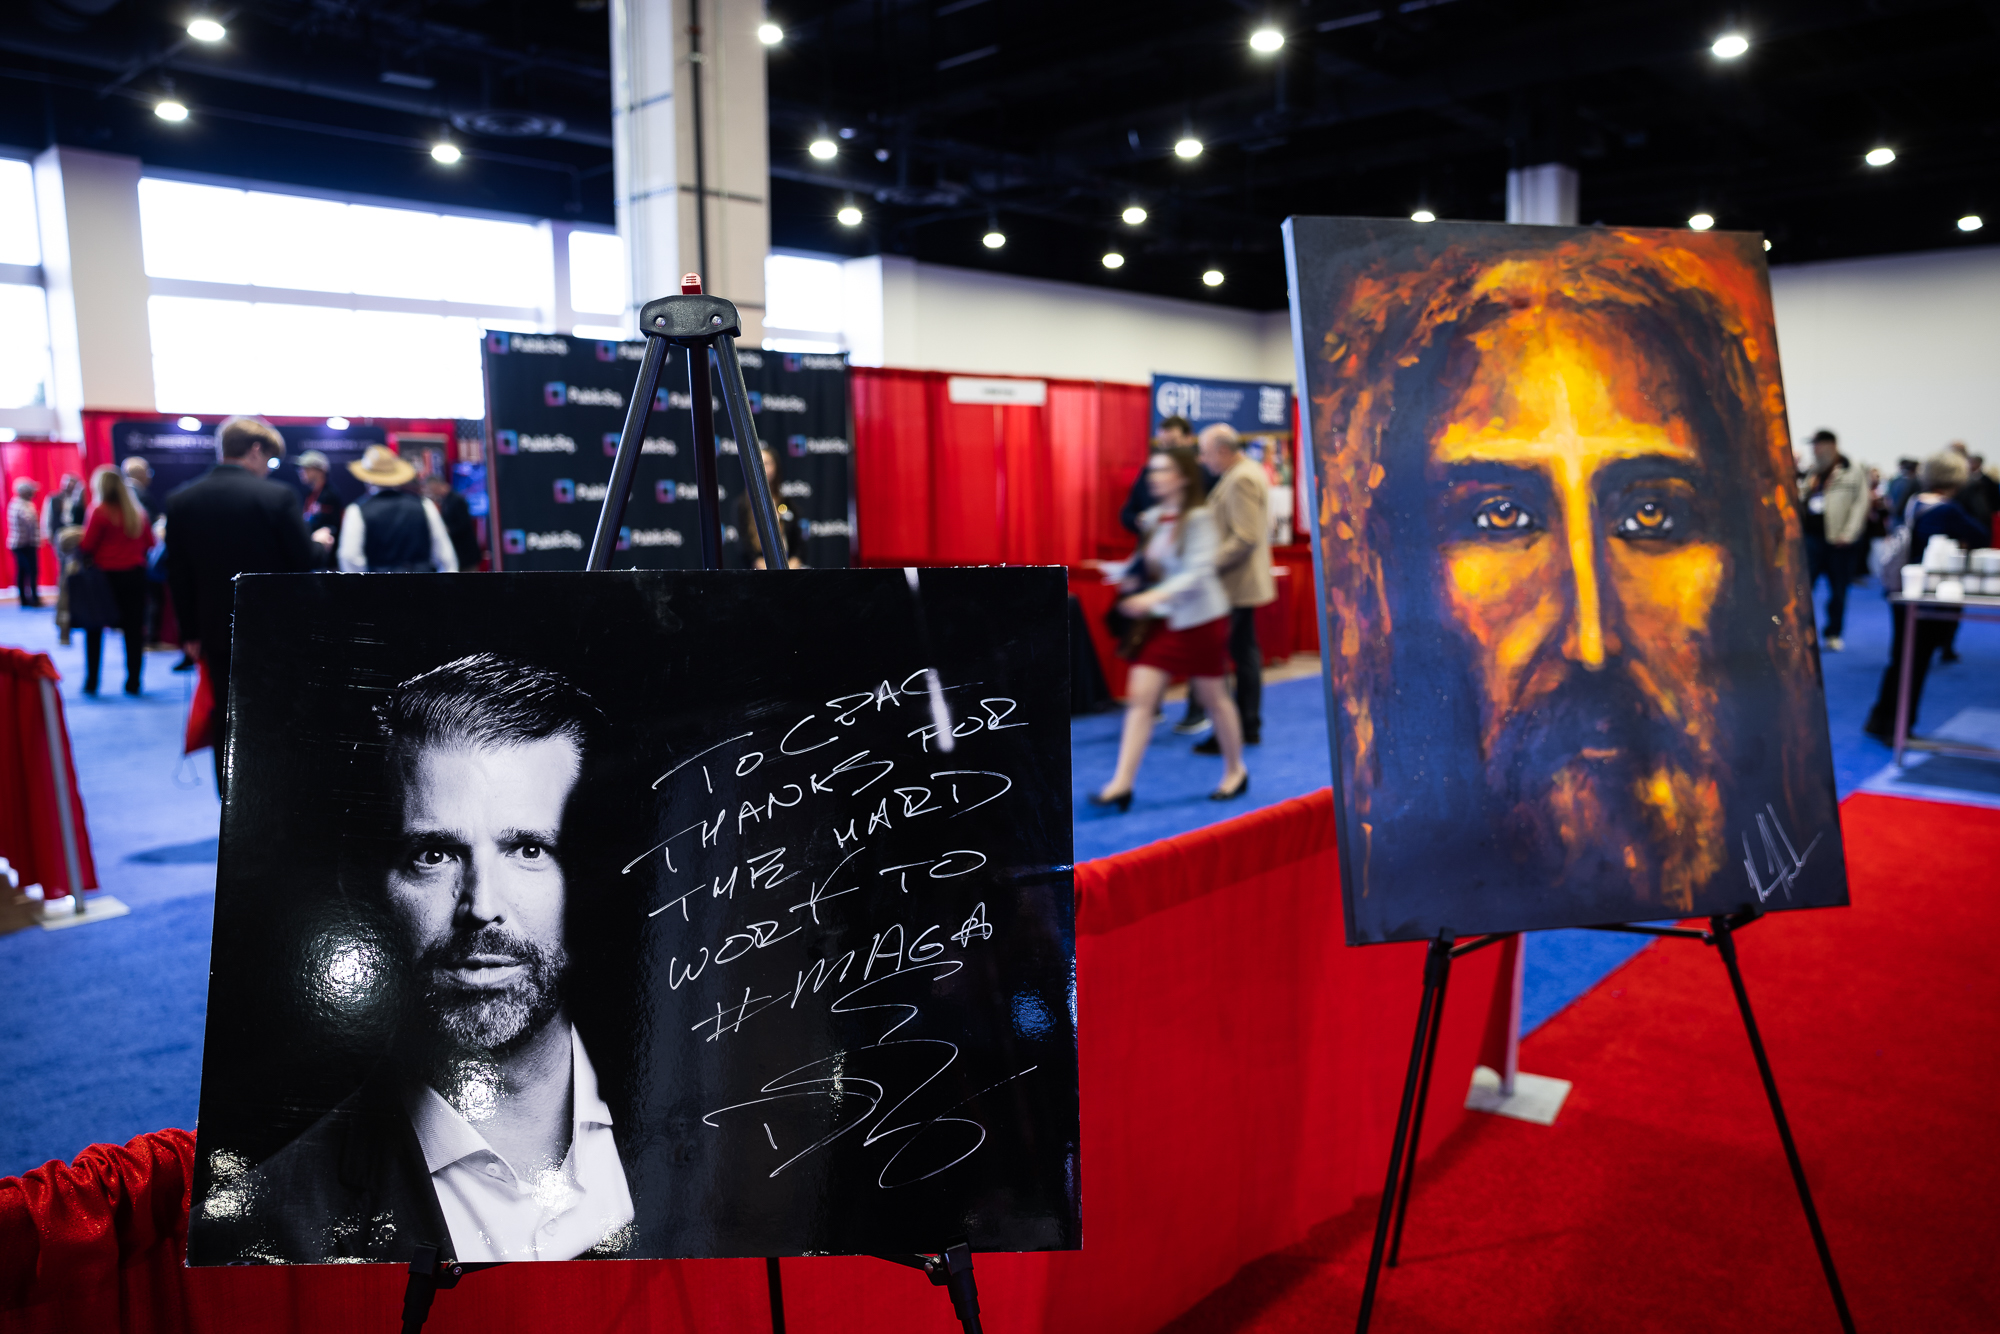 A signed photograph of Donald Trump, Jr. and a painting of Jesus Christ stood side-by-side in one of the halls.